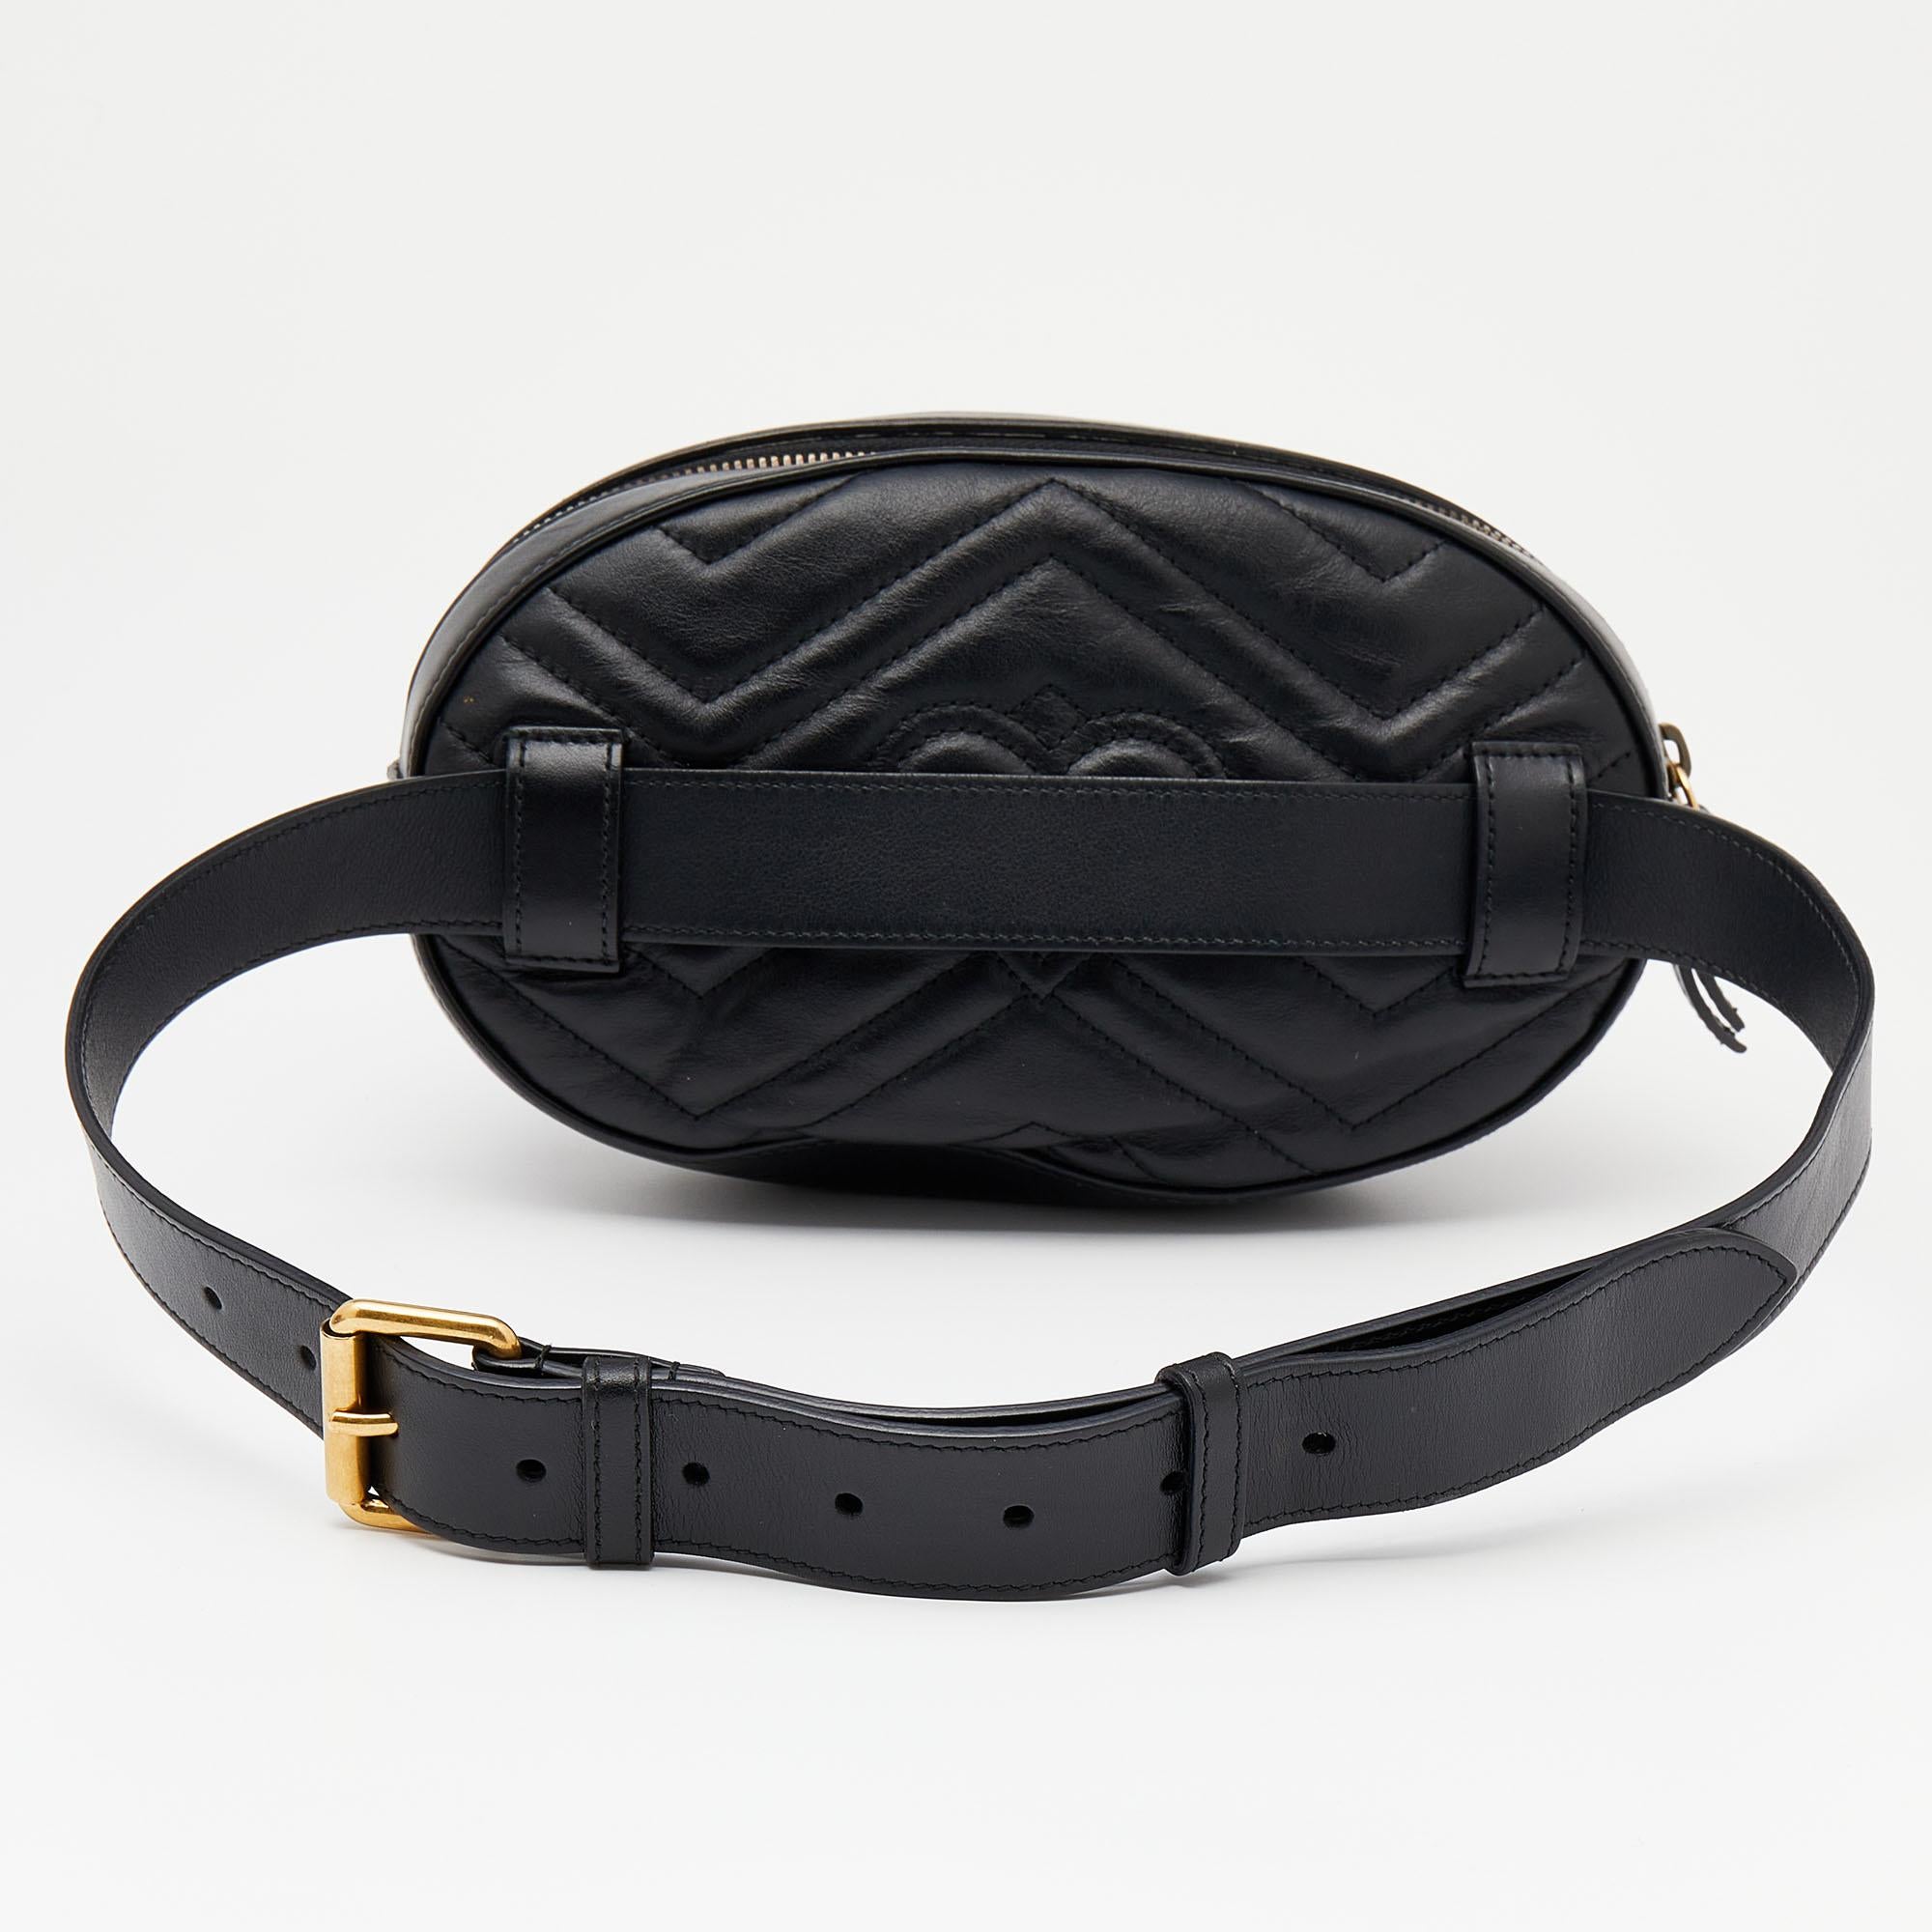 The GG Marmont belt bag was released in the brand's Pre-Fall 2017 collection, and it went on to be a hit! This one here in matelassé leather is equipped with a zipper fastening that opens to a well-sized suede interior. On the front, there is a GG